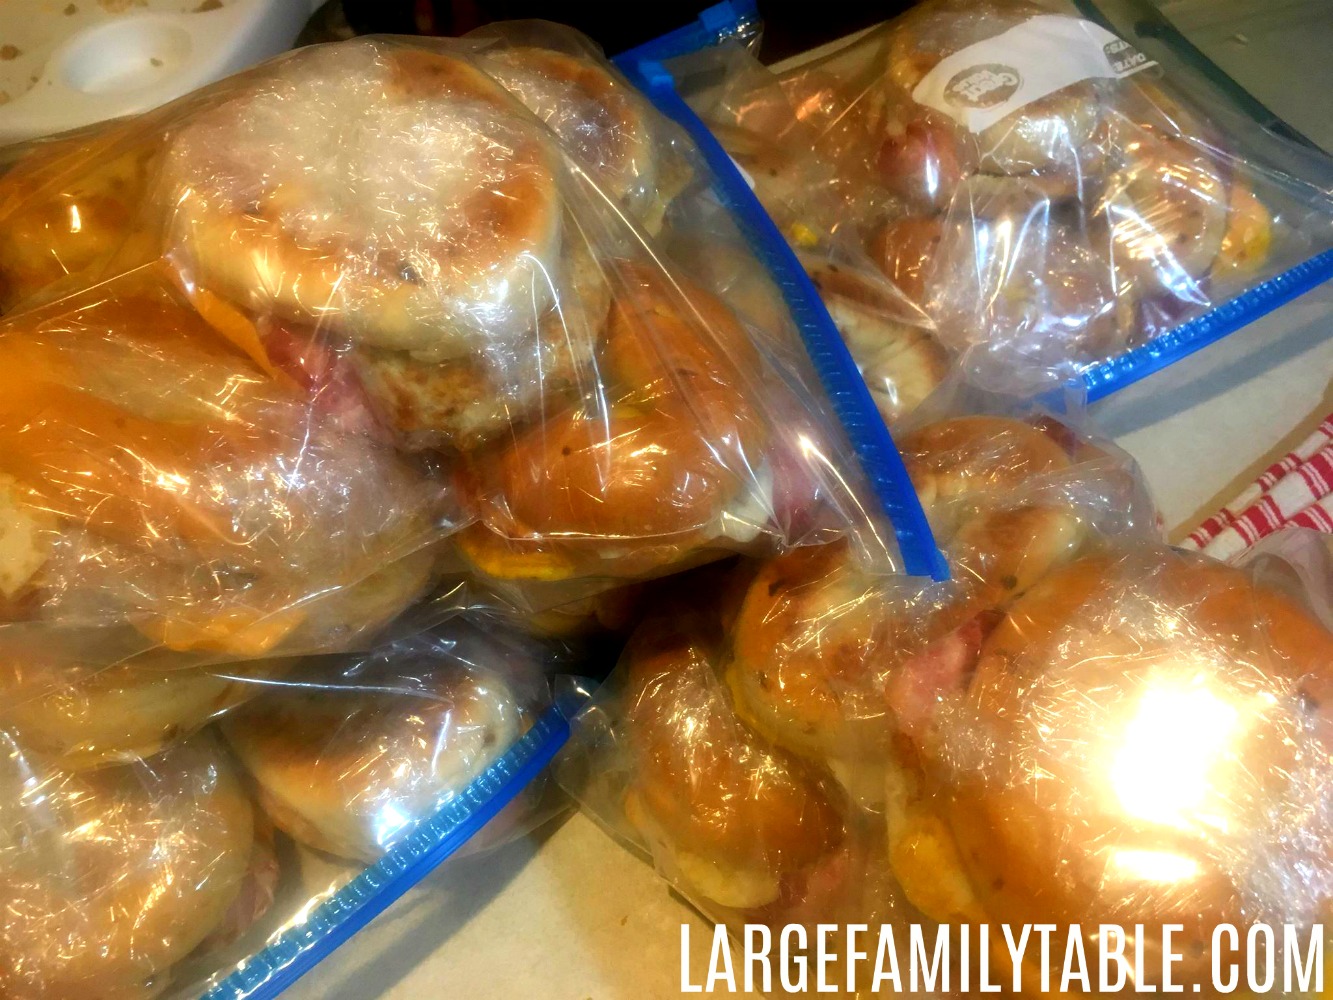 bagel sandwiches wrapped up in gallon bags